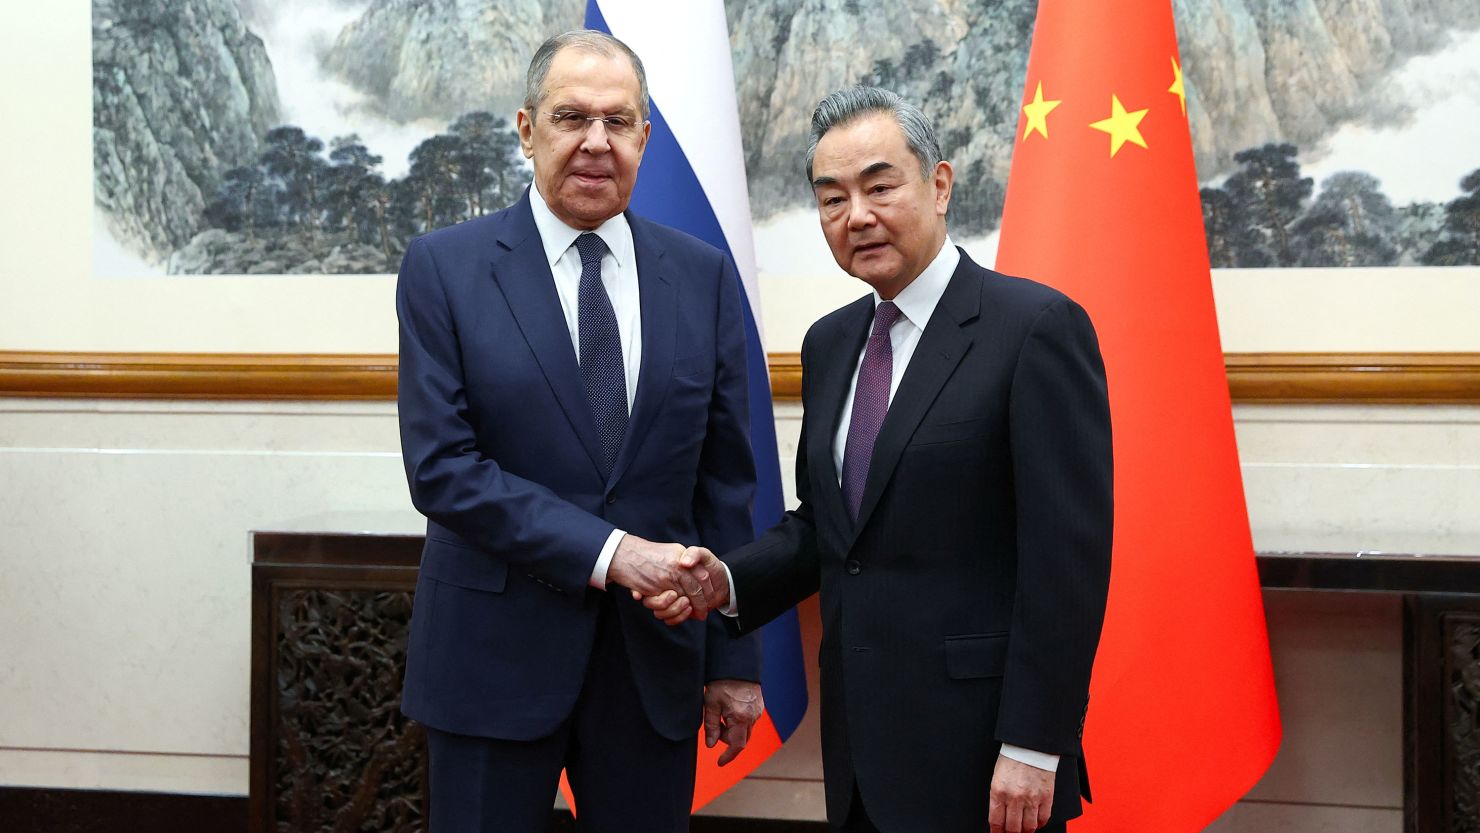 Russia's Foreign Minister Sergey Lavrov shakes hands with China's Foreign Minister Wang Yi during a meeting in Beijing on April 9, 2024.